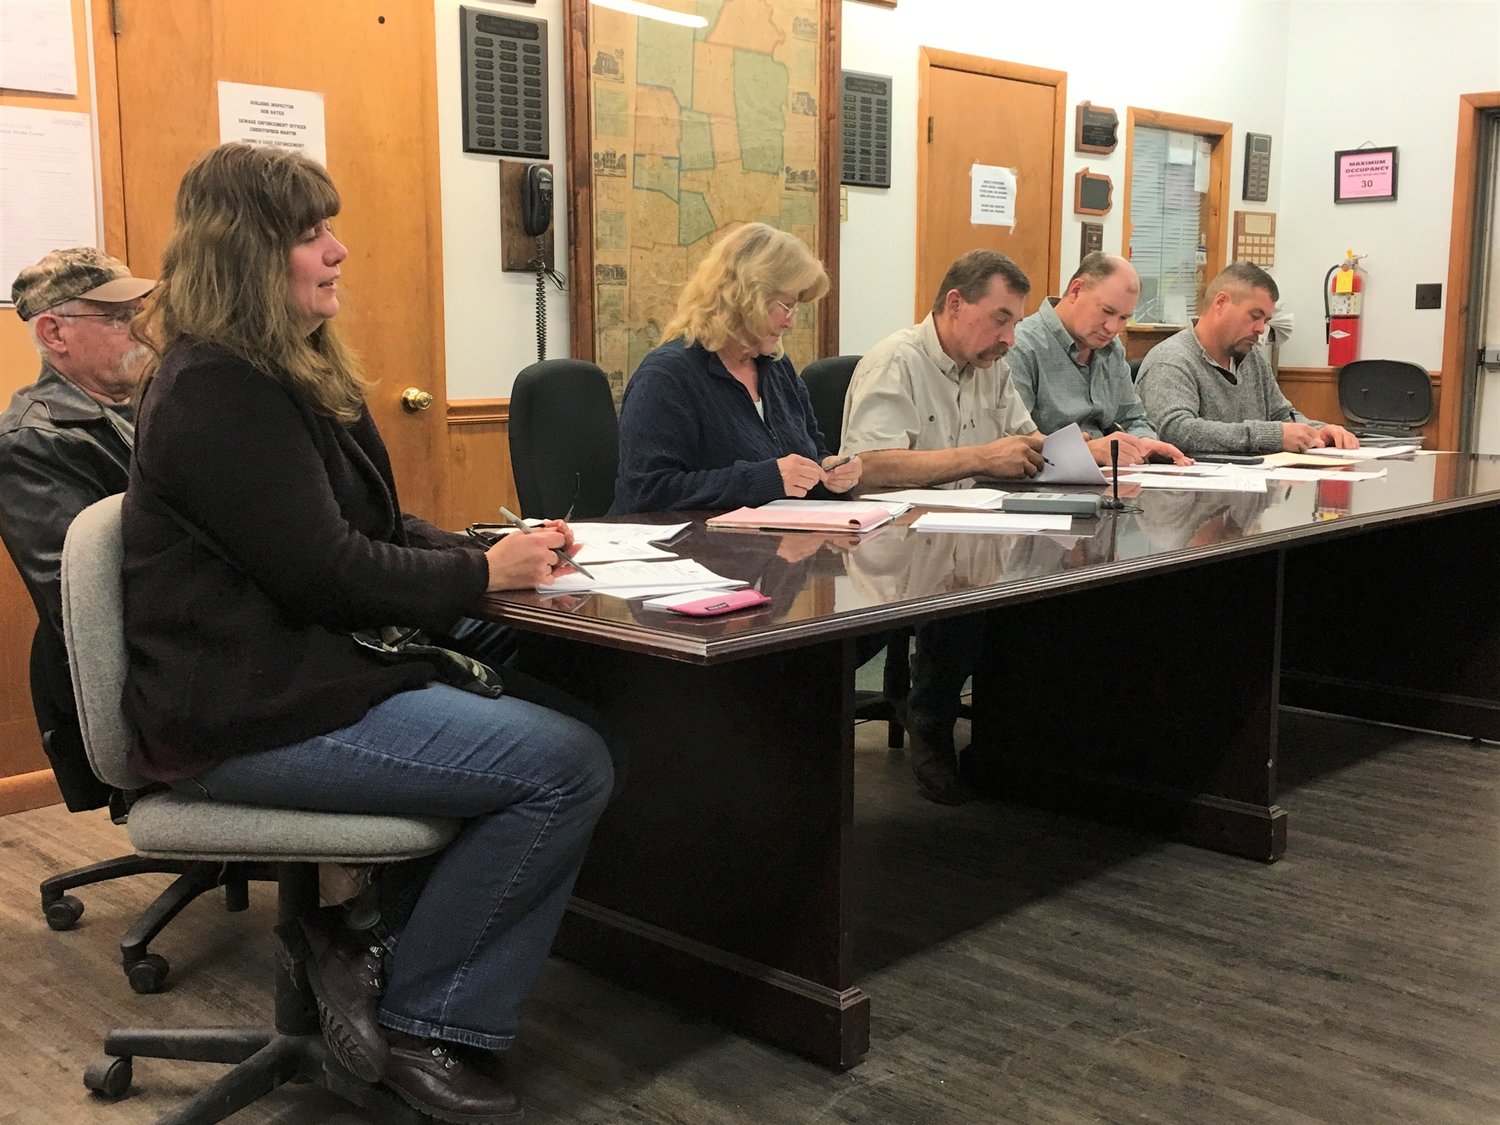 Pictured at the Damascus Board of Supervisors meeting are Melissa Haviland, left, Ed Langarenne, Dolores Card, Joseph Canfield, Steve Adams and Daniel Rutledge